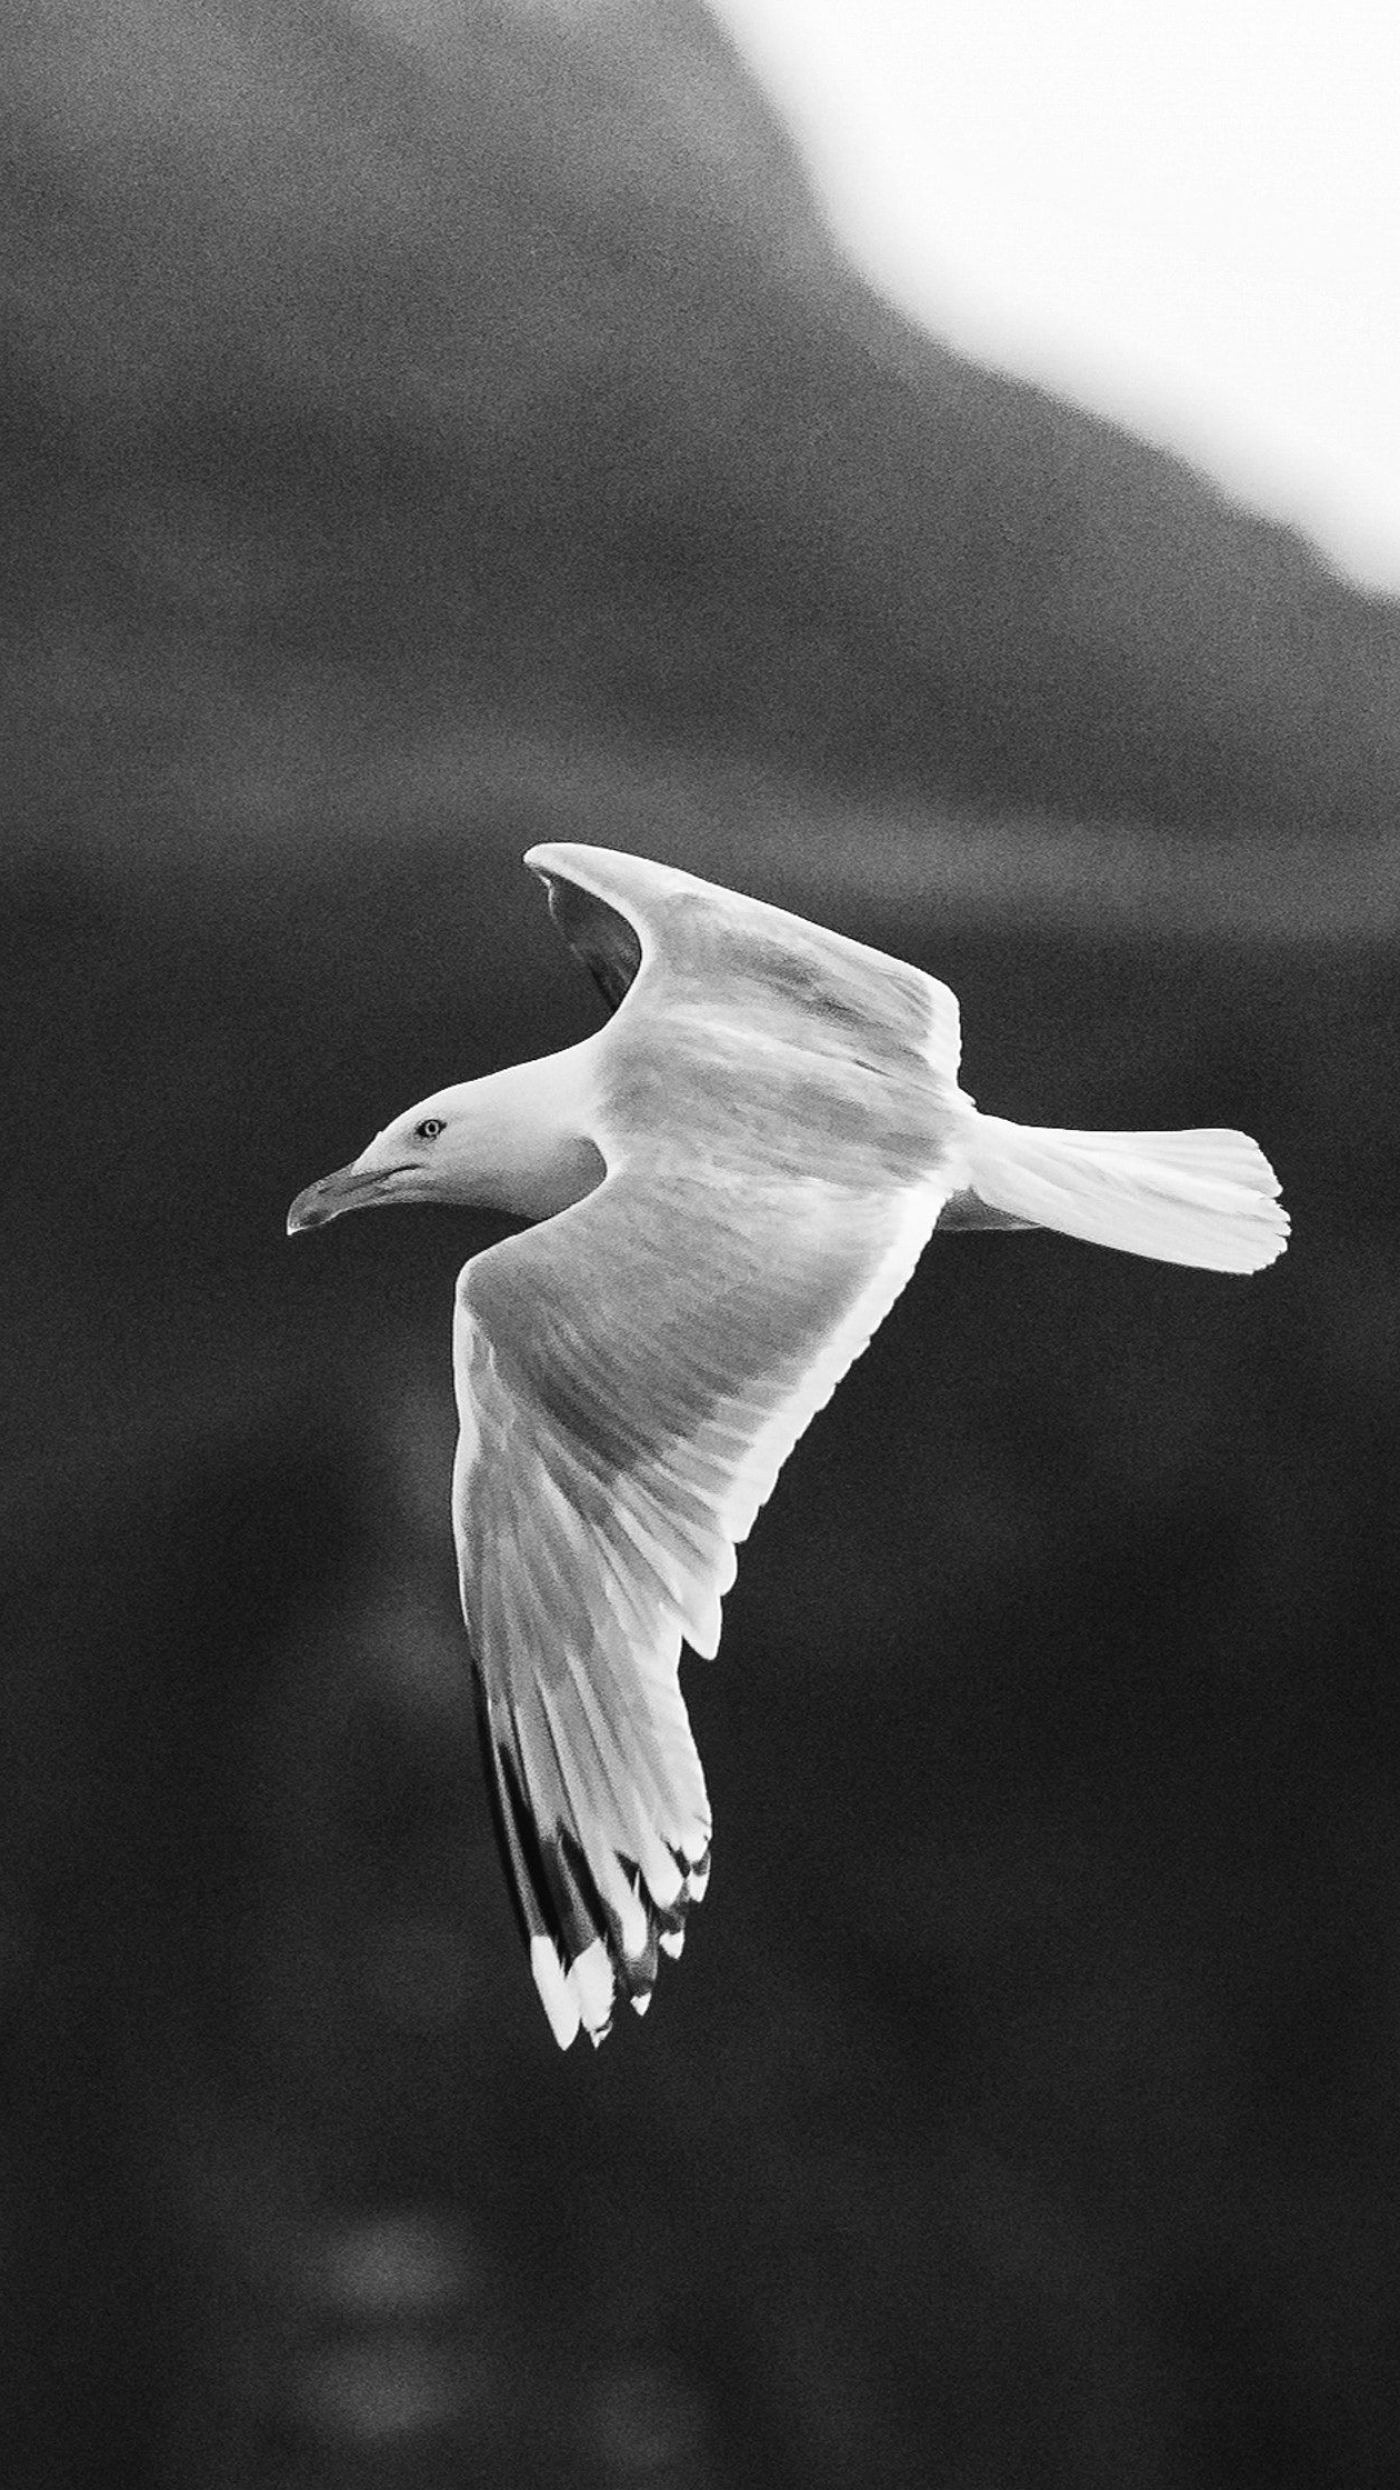 1400x2490 Closeup of a flying seagull mobile phone wallpaper | premium image by / Luke Stackpoole | Phone wallpaper, Backgrounds phone wallpapers, Seagull